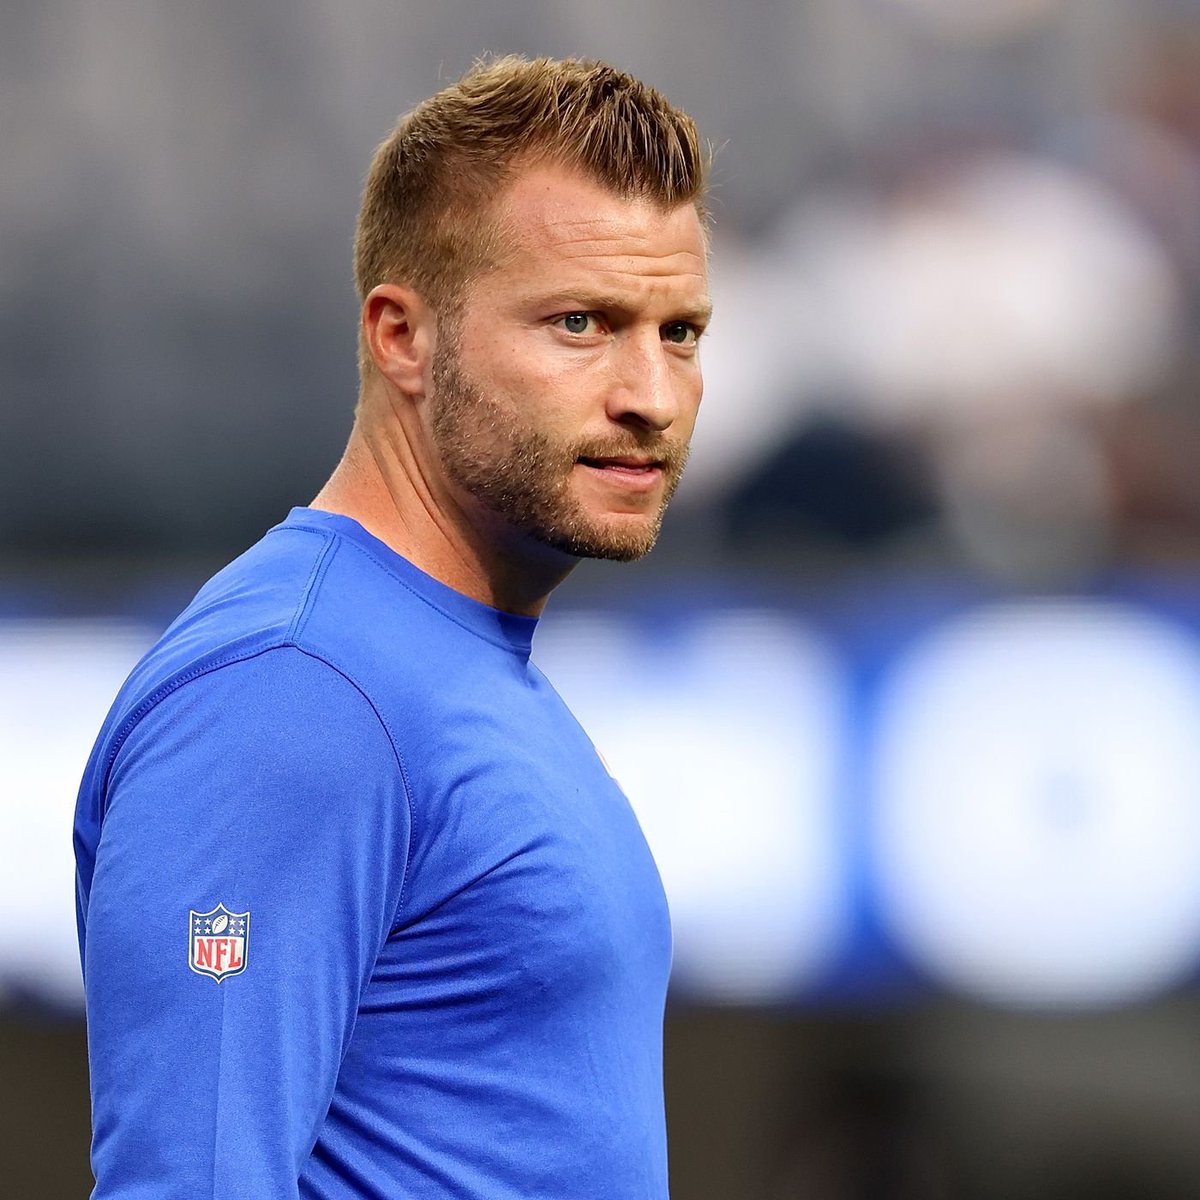 The Head Coach for the Rams, Sean McVay is HAF! 🔥. 